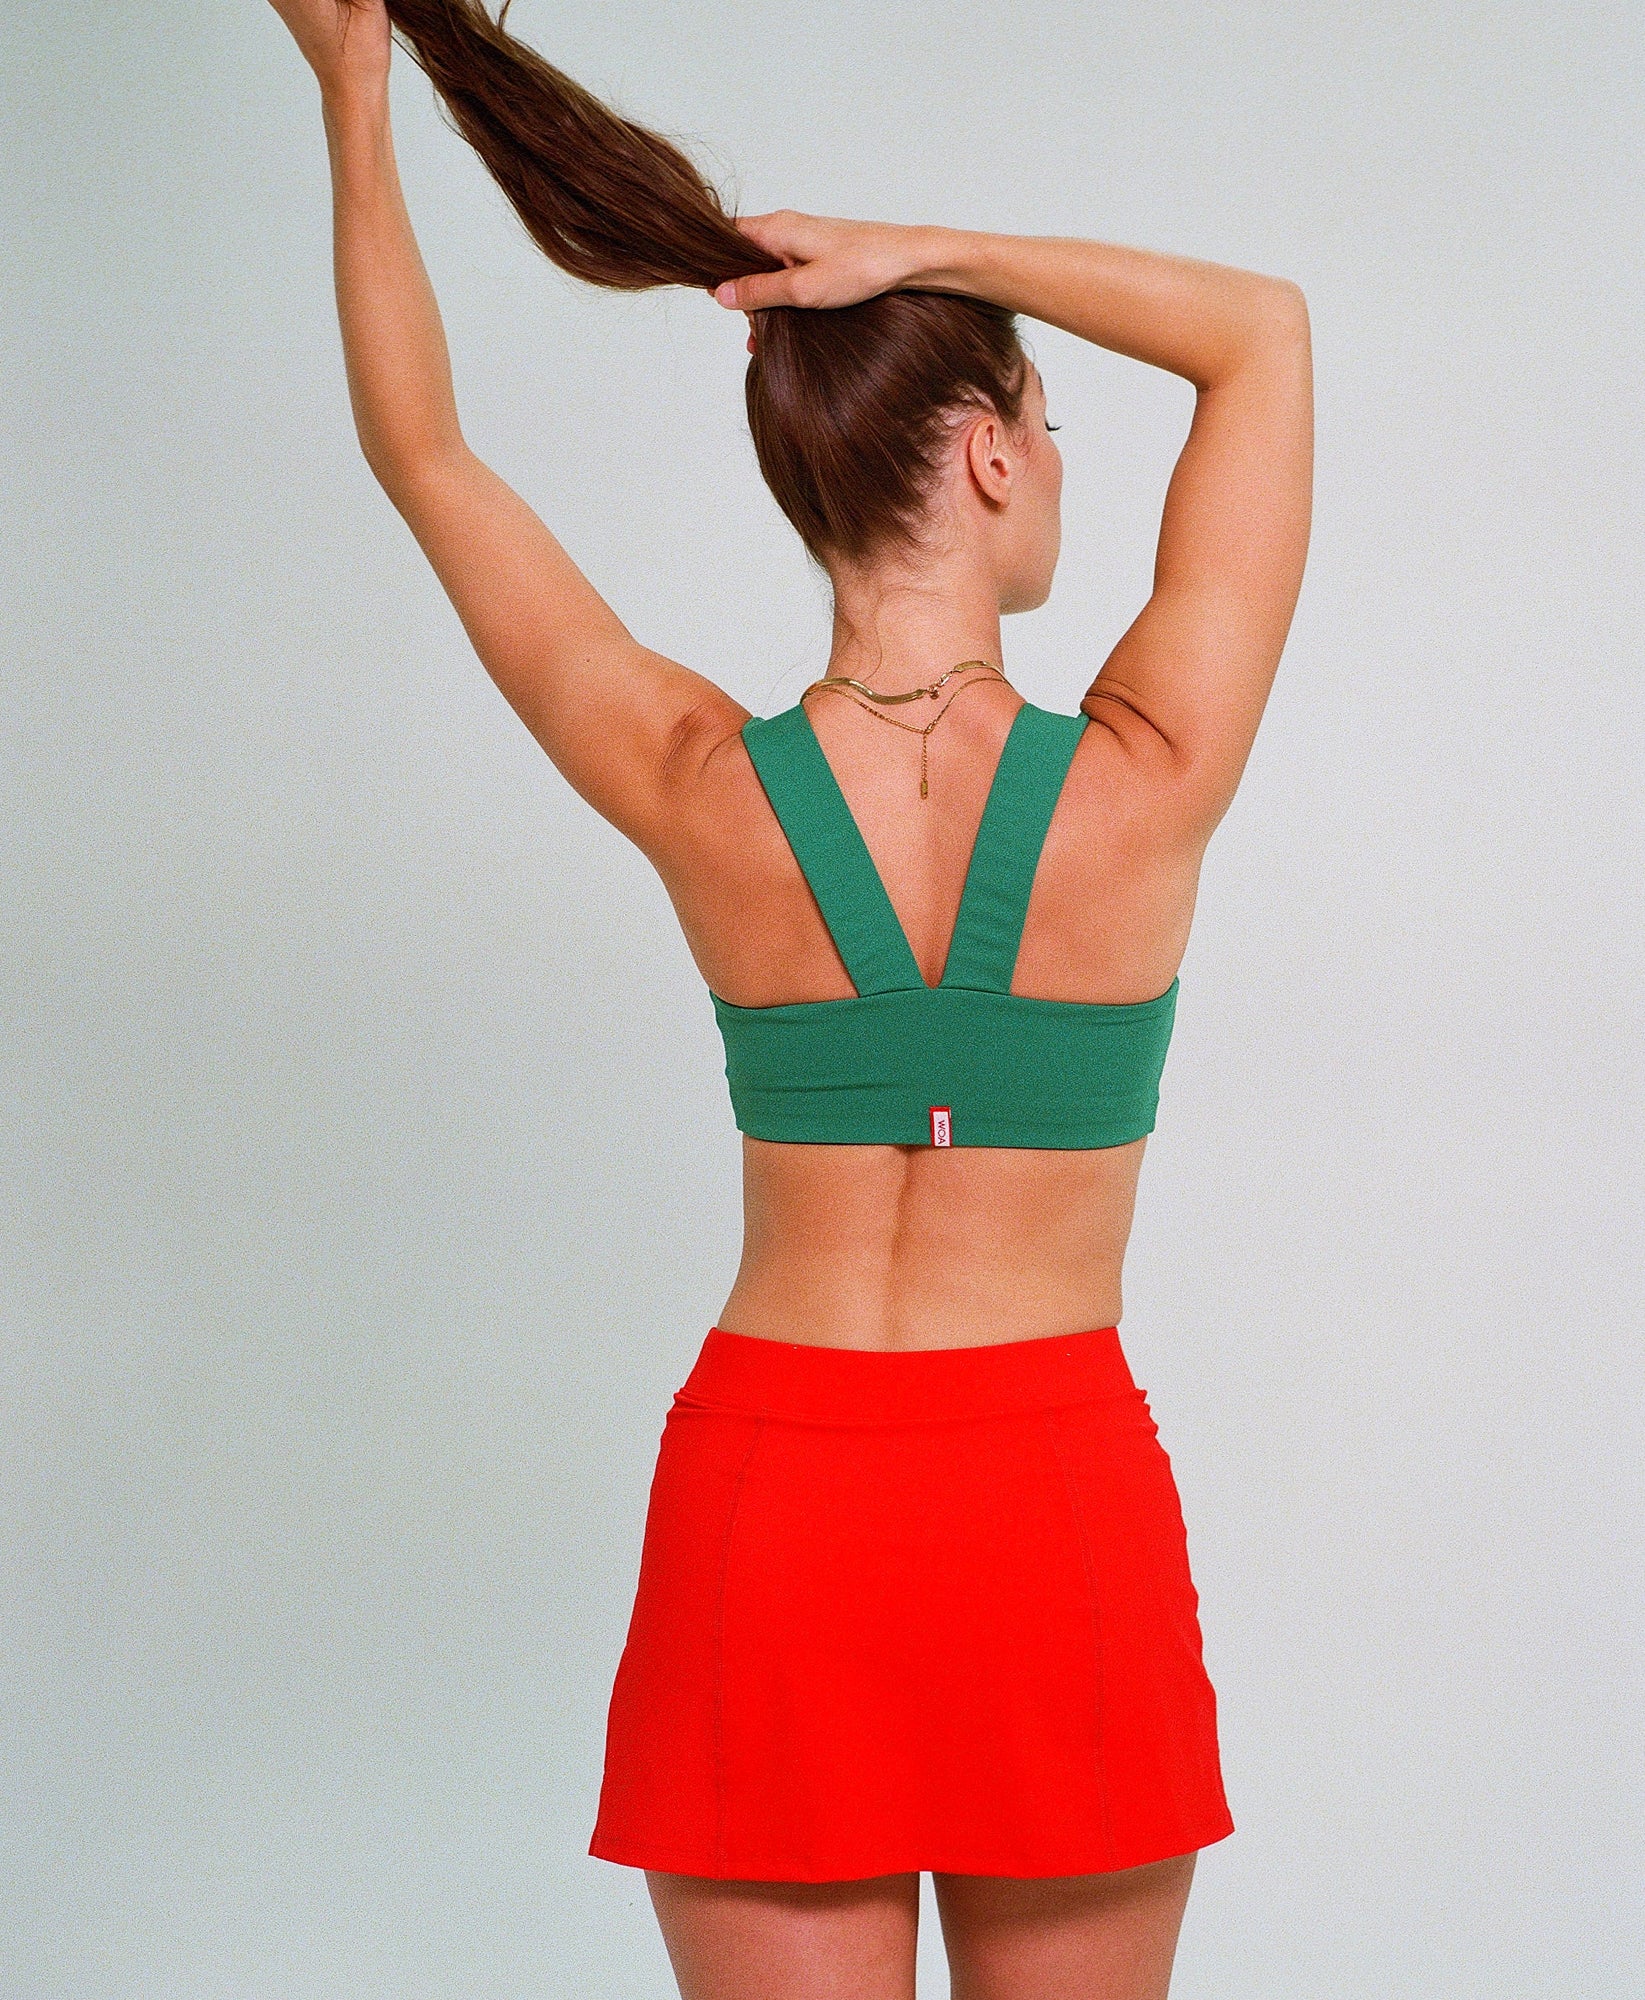 Wear One's At Routine Bra in Betty Green on Model Back View